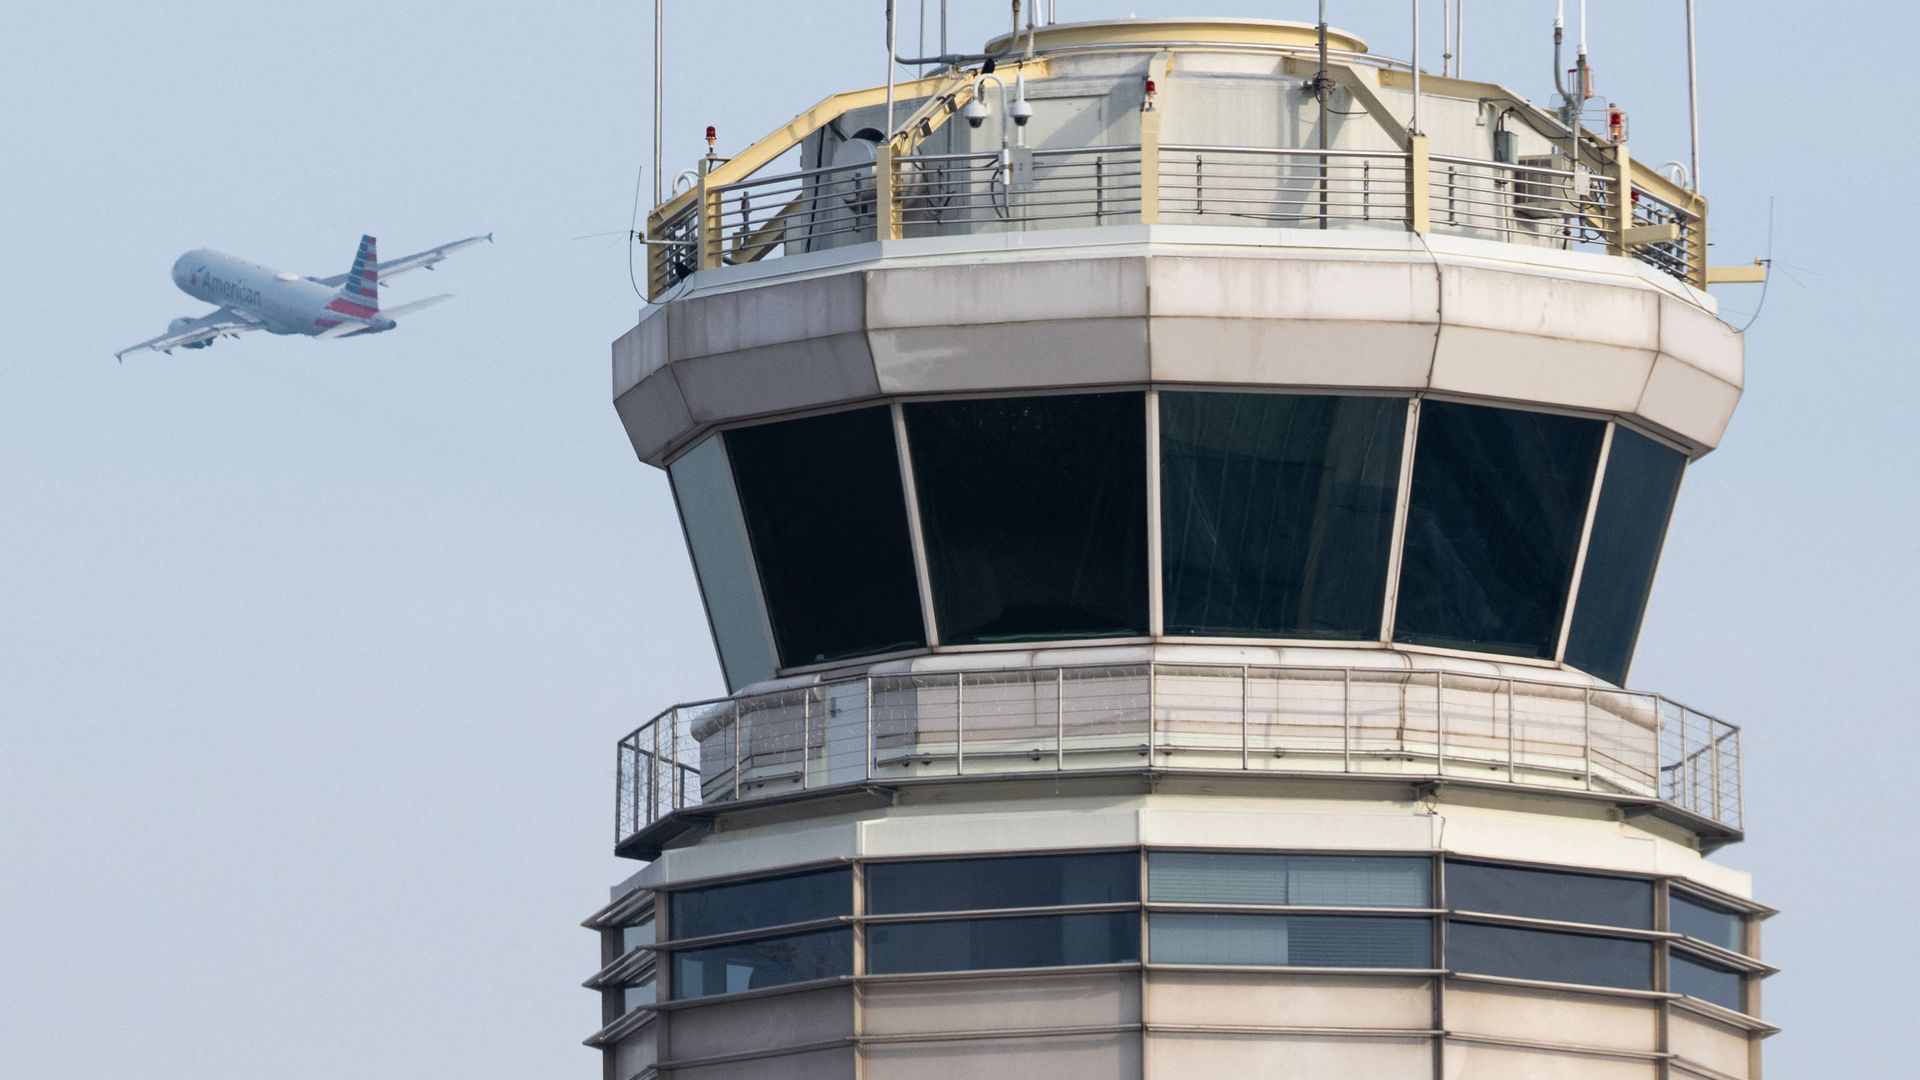 An American Airlines Airbus A319 airplane takes off past the air traffic control tower at Ronald Reagan Washington National Airport.